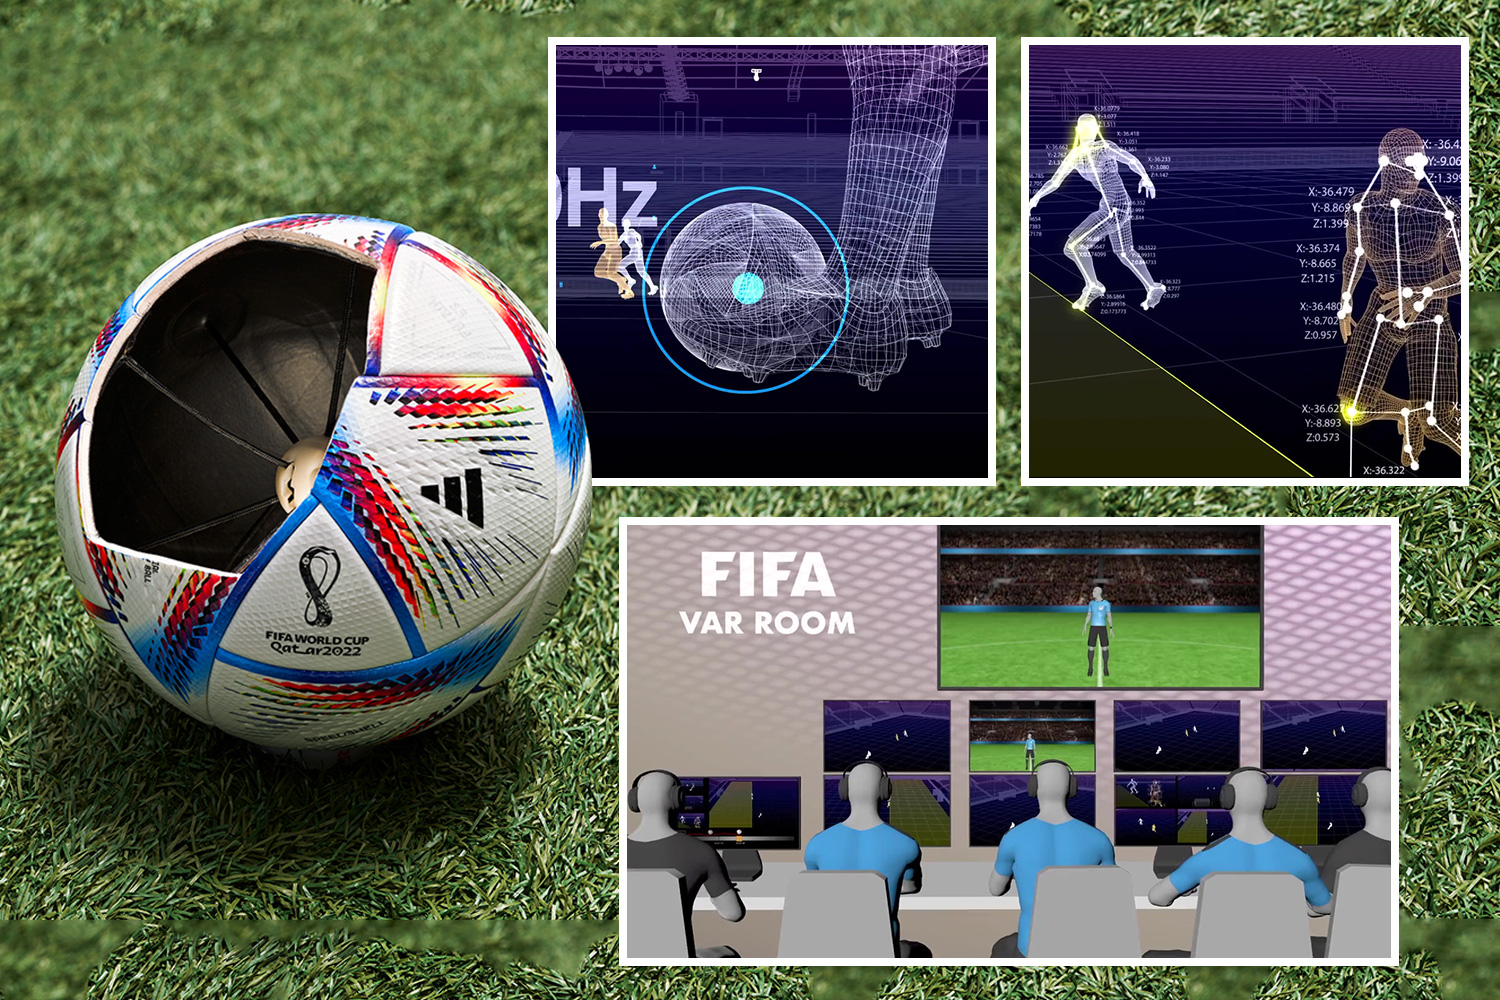 SPORT PREVIEW FIFA WC BALL - FIFA Will Use AI to Track Players’ Bodies to Make Offside Calls at 2022 World Cup